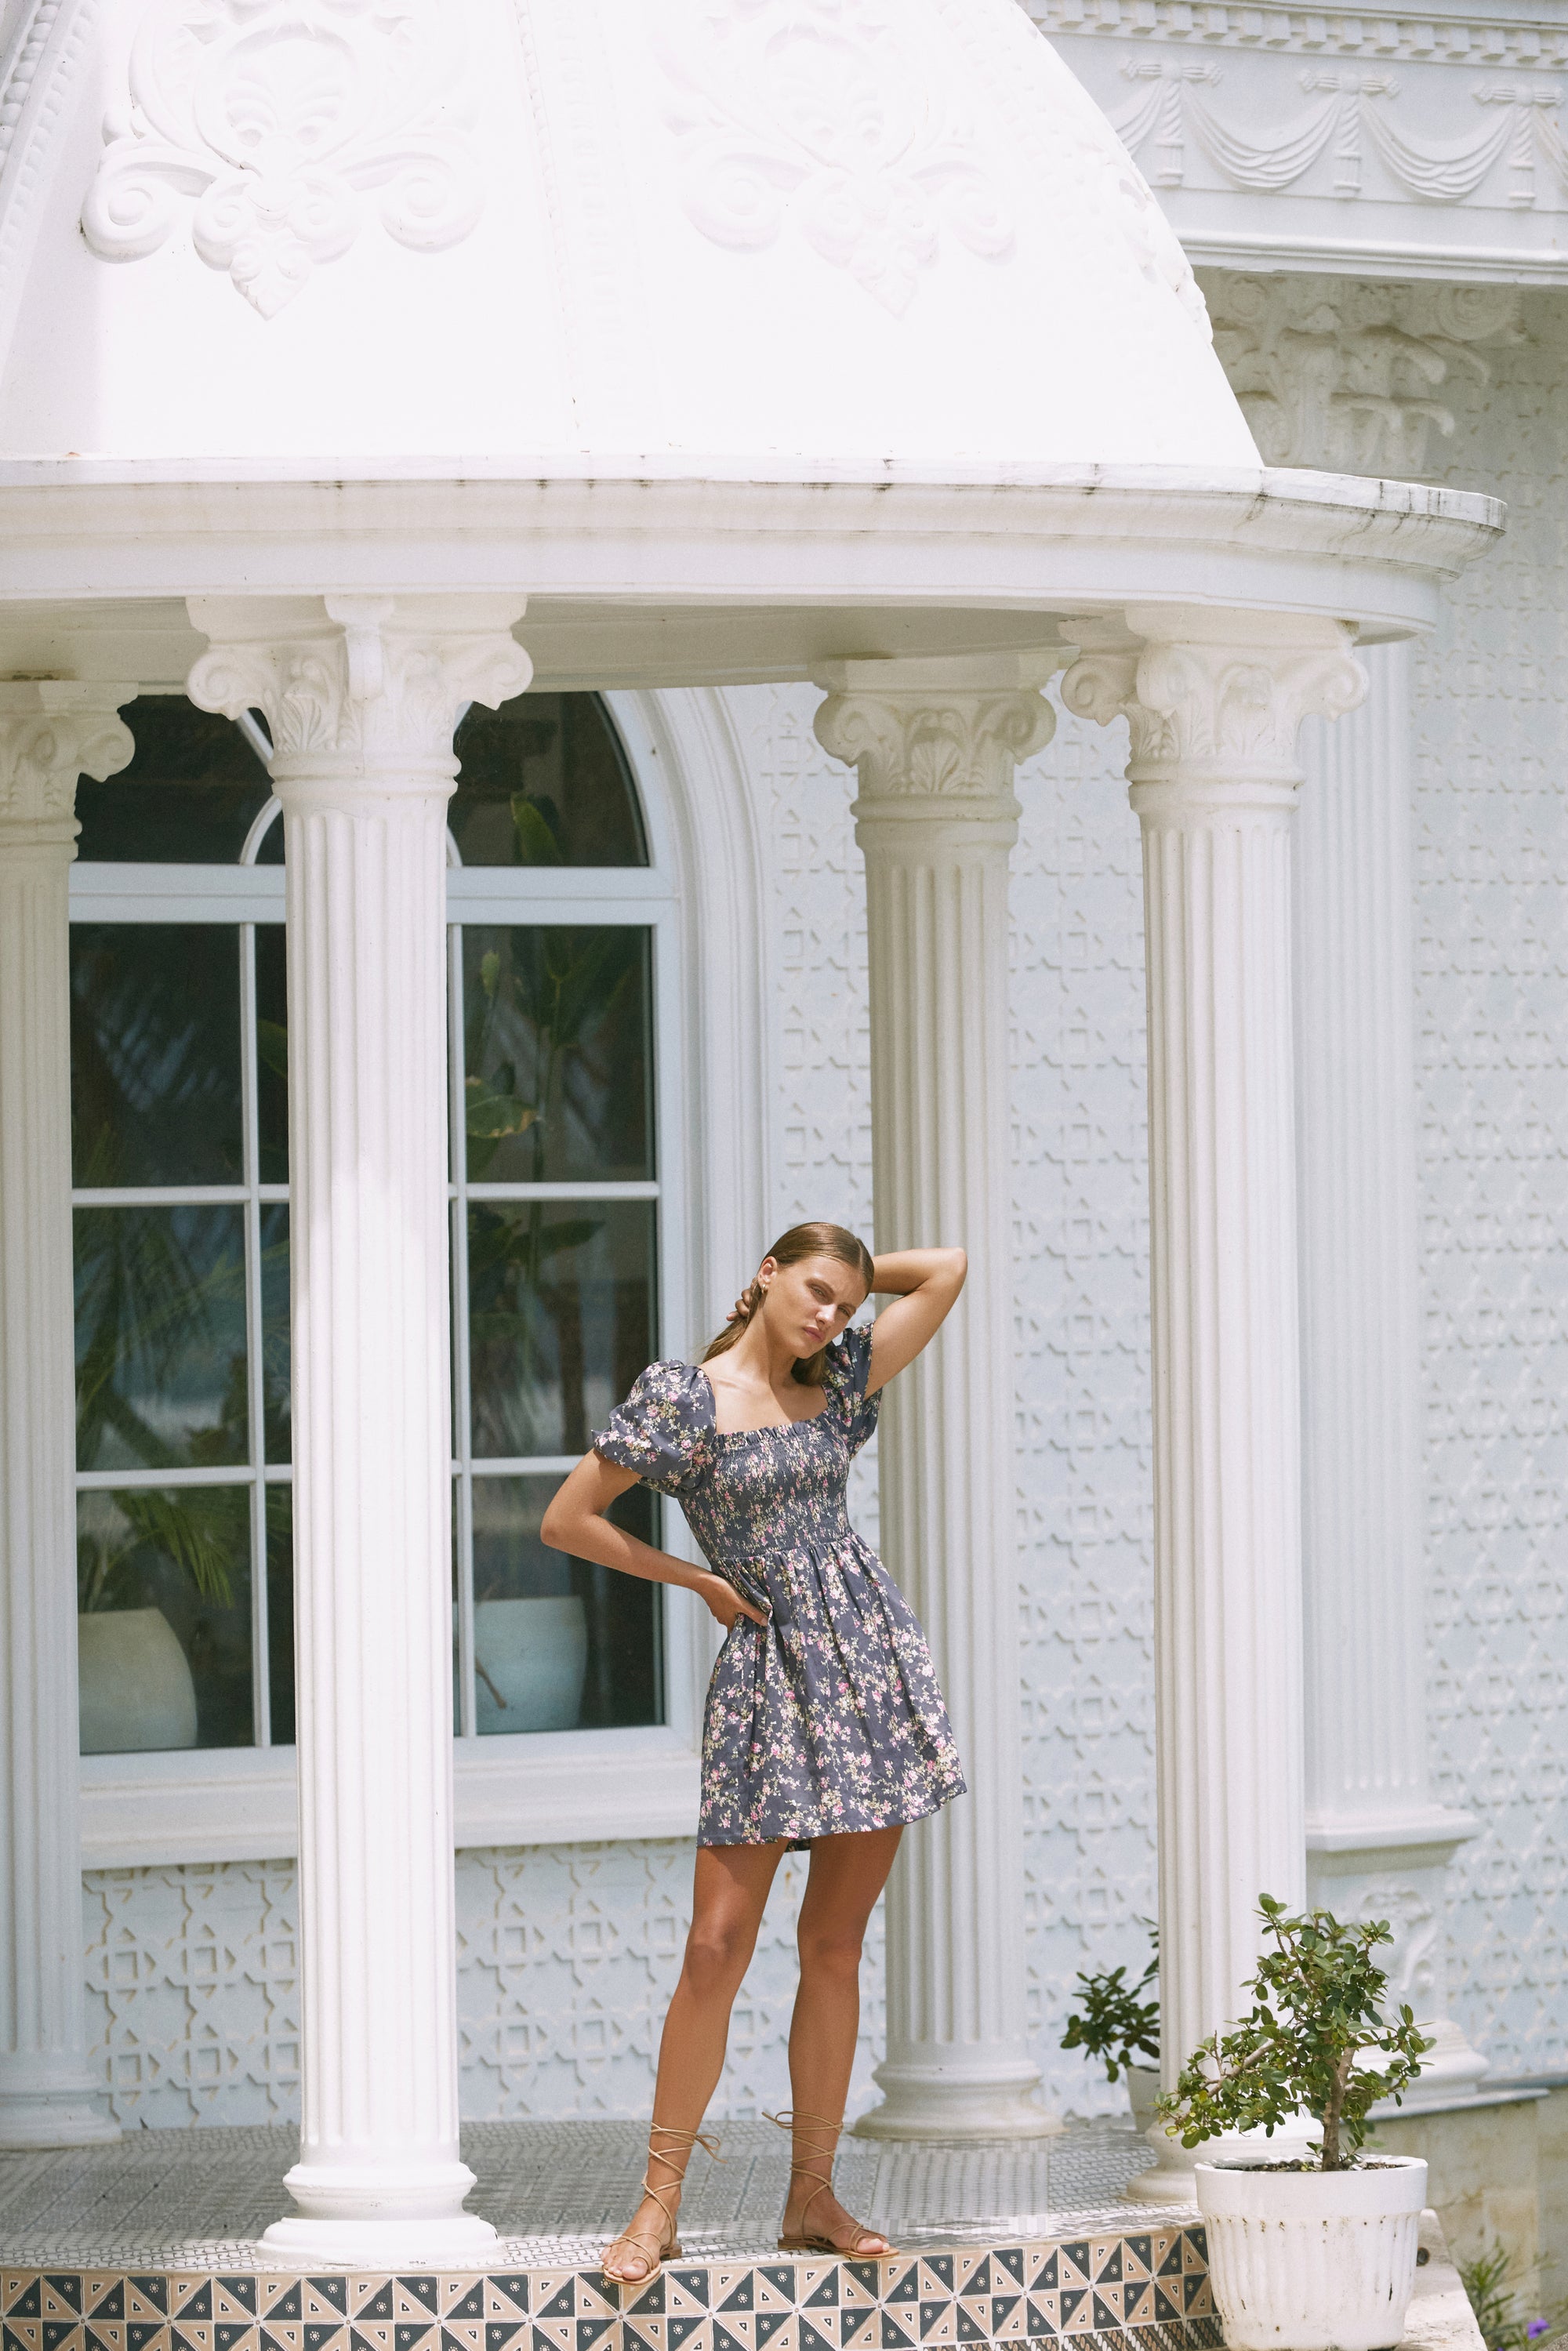 Woman modelling in front of a porch wearing floral print summer dress